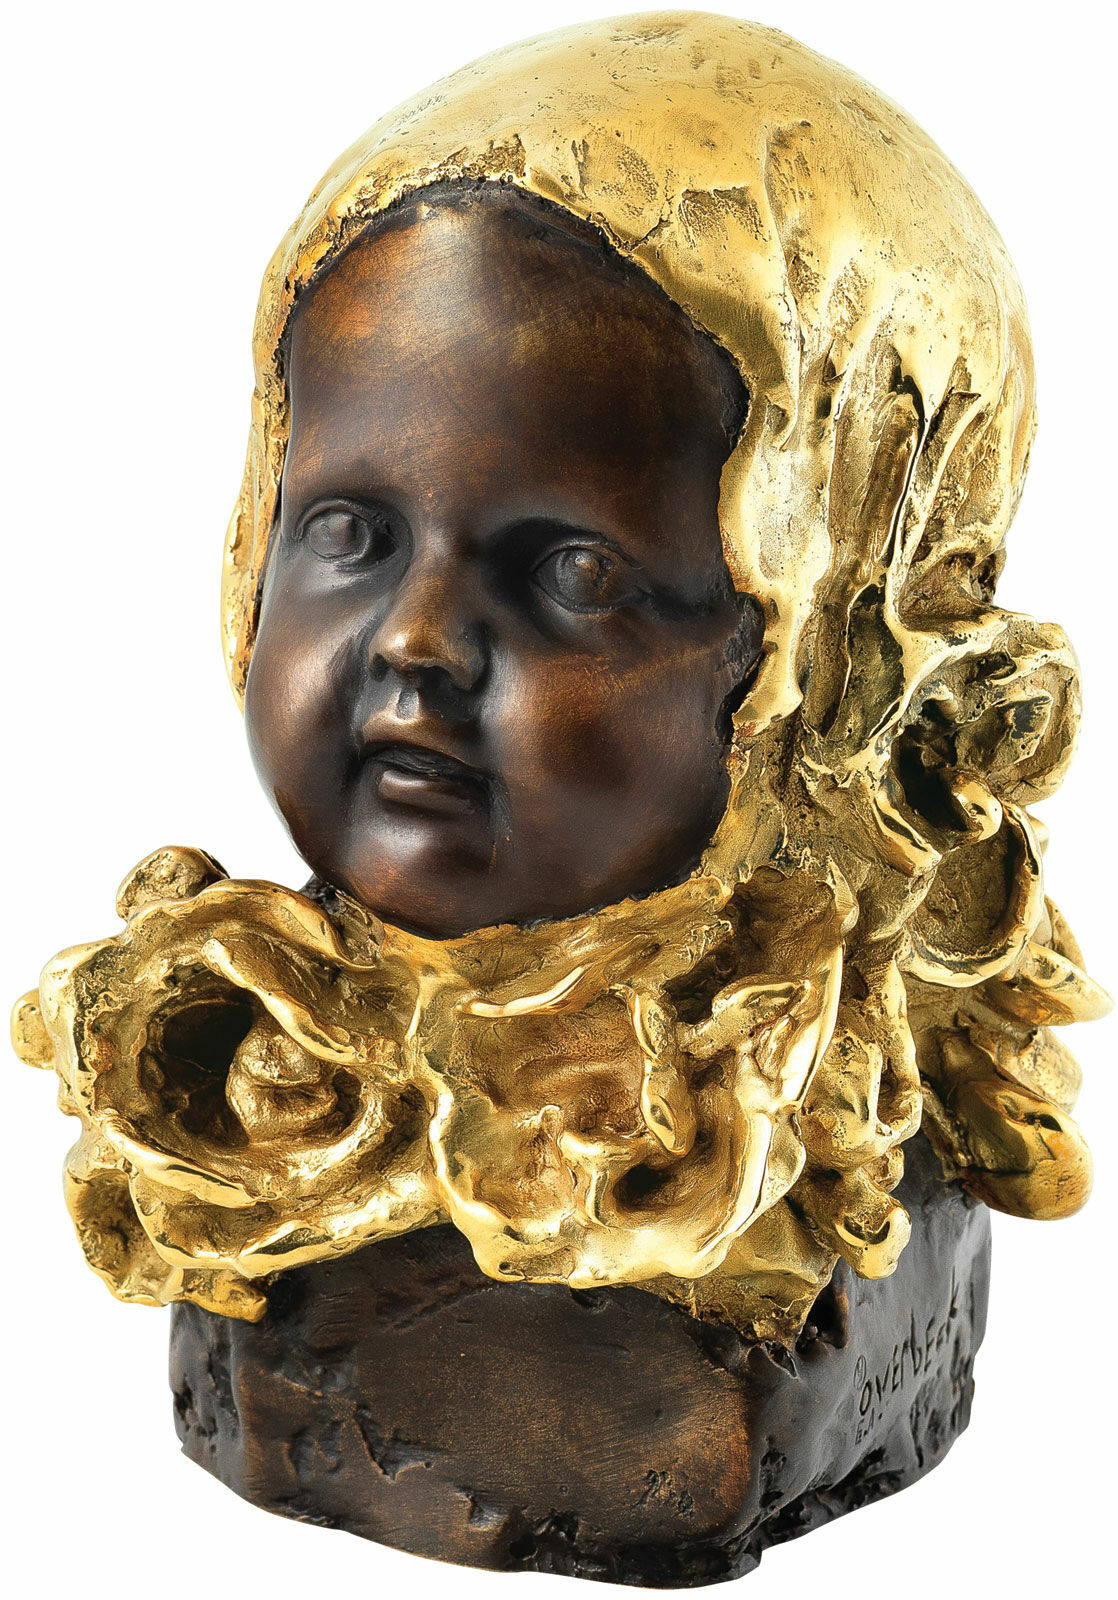 Sculpture "Girl with Golden Headscarf", bronze partially gold-plated by Cyrus Overbeck